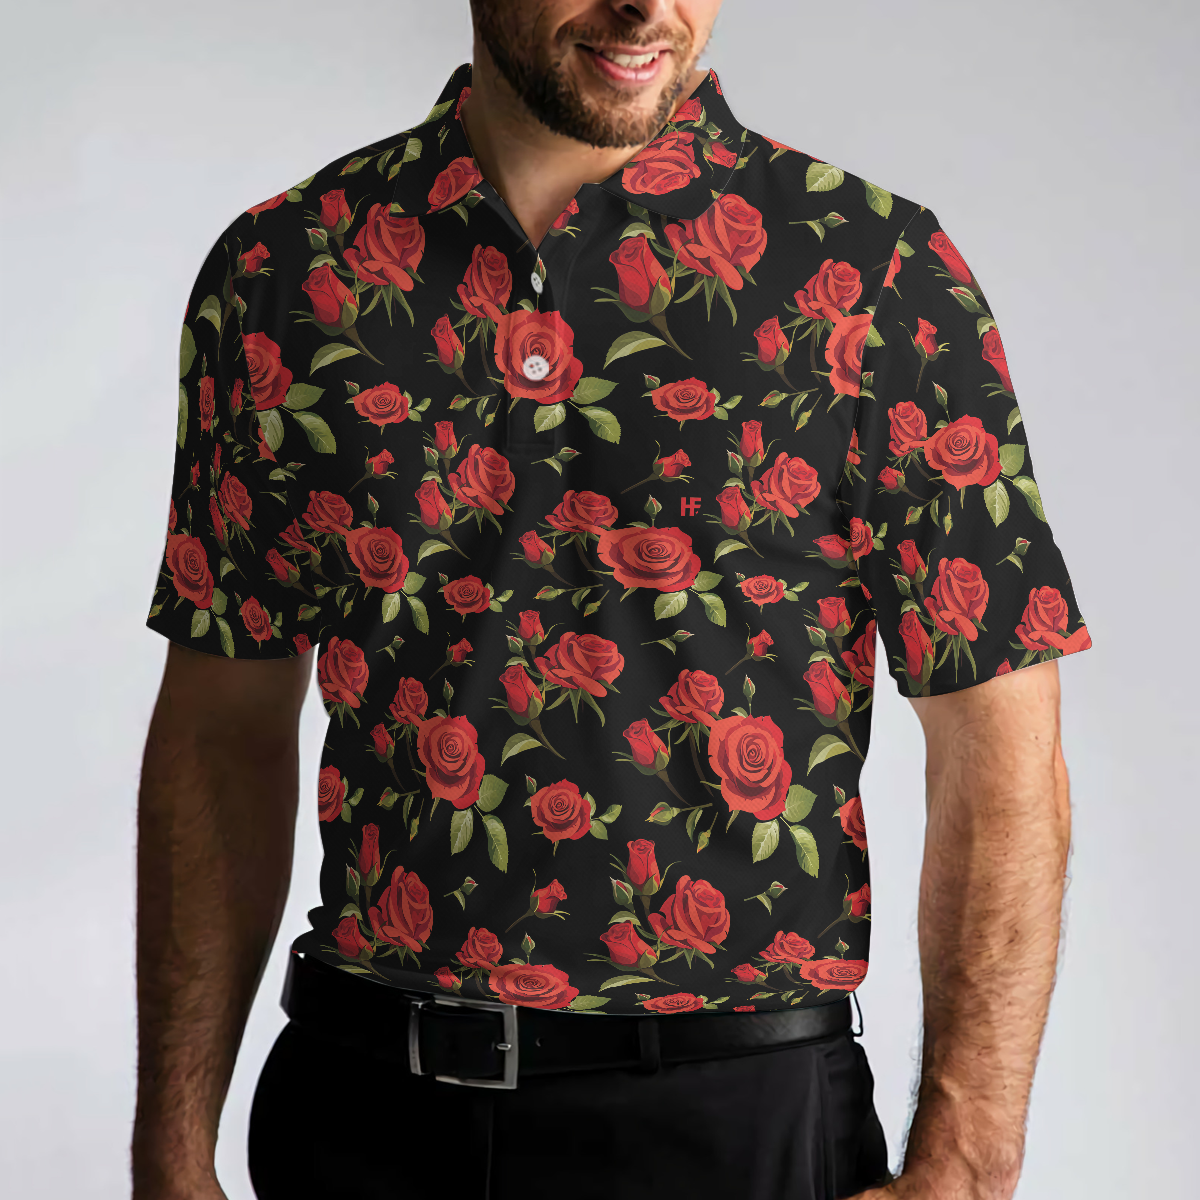 Red Roses Polo Shirt Red Roses Seamless Pattern Shirt For Adults Best Rose Themed Gift Idea For Rose Fans - 4